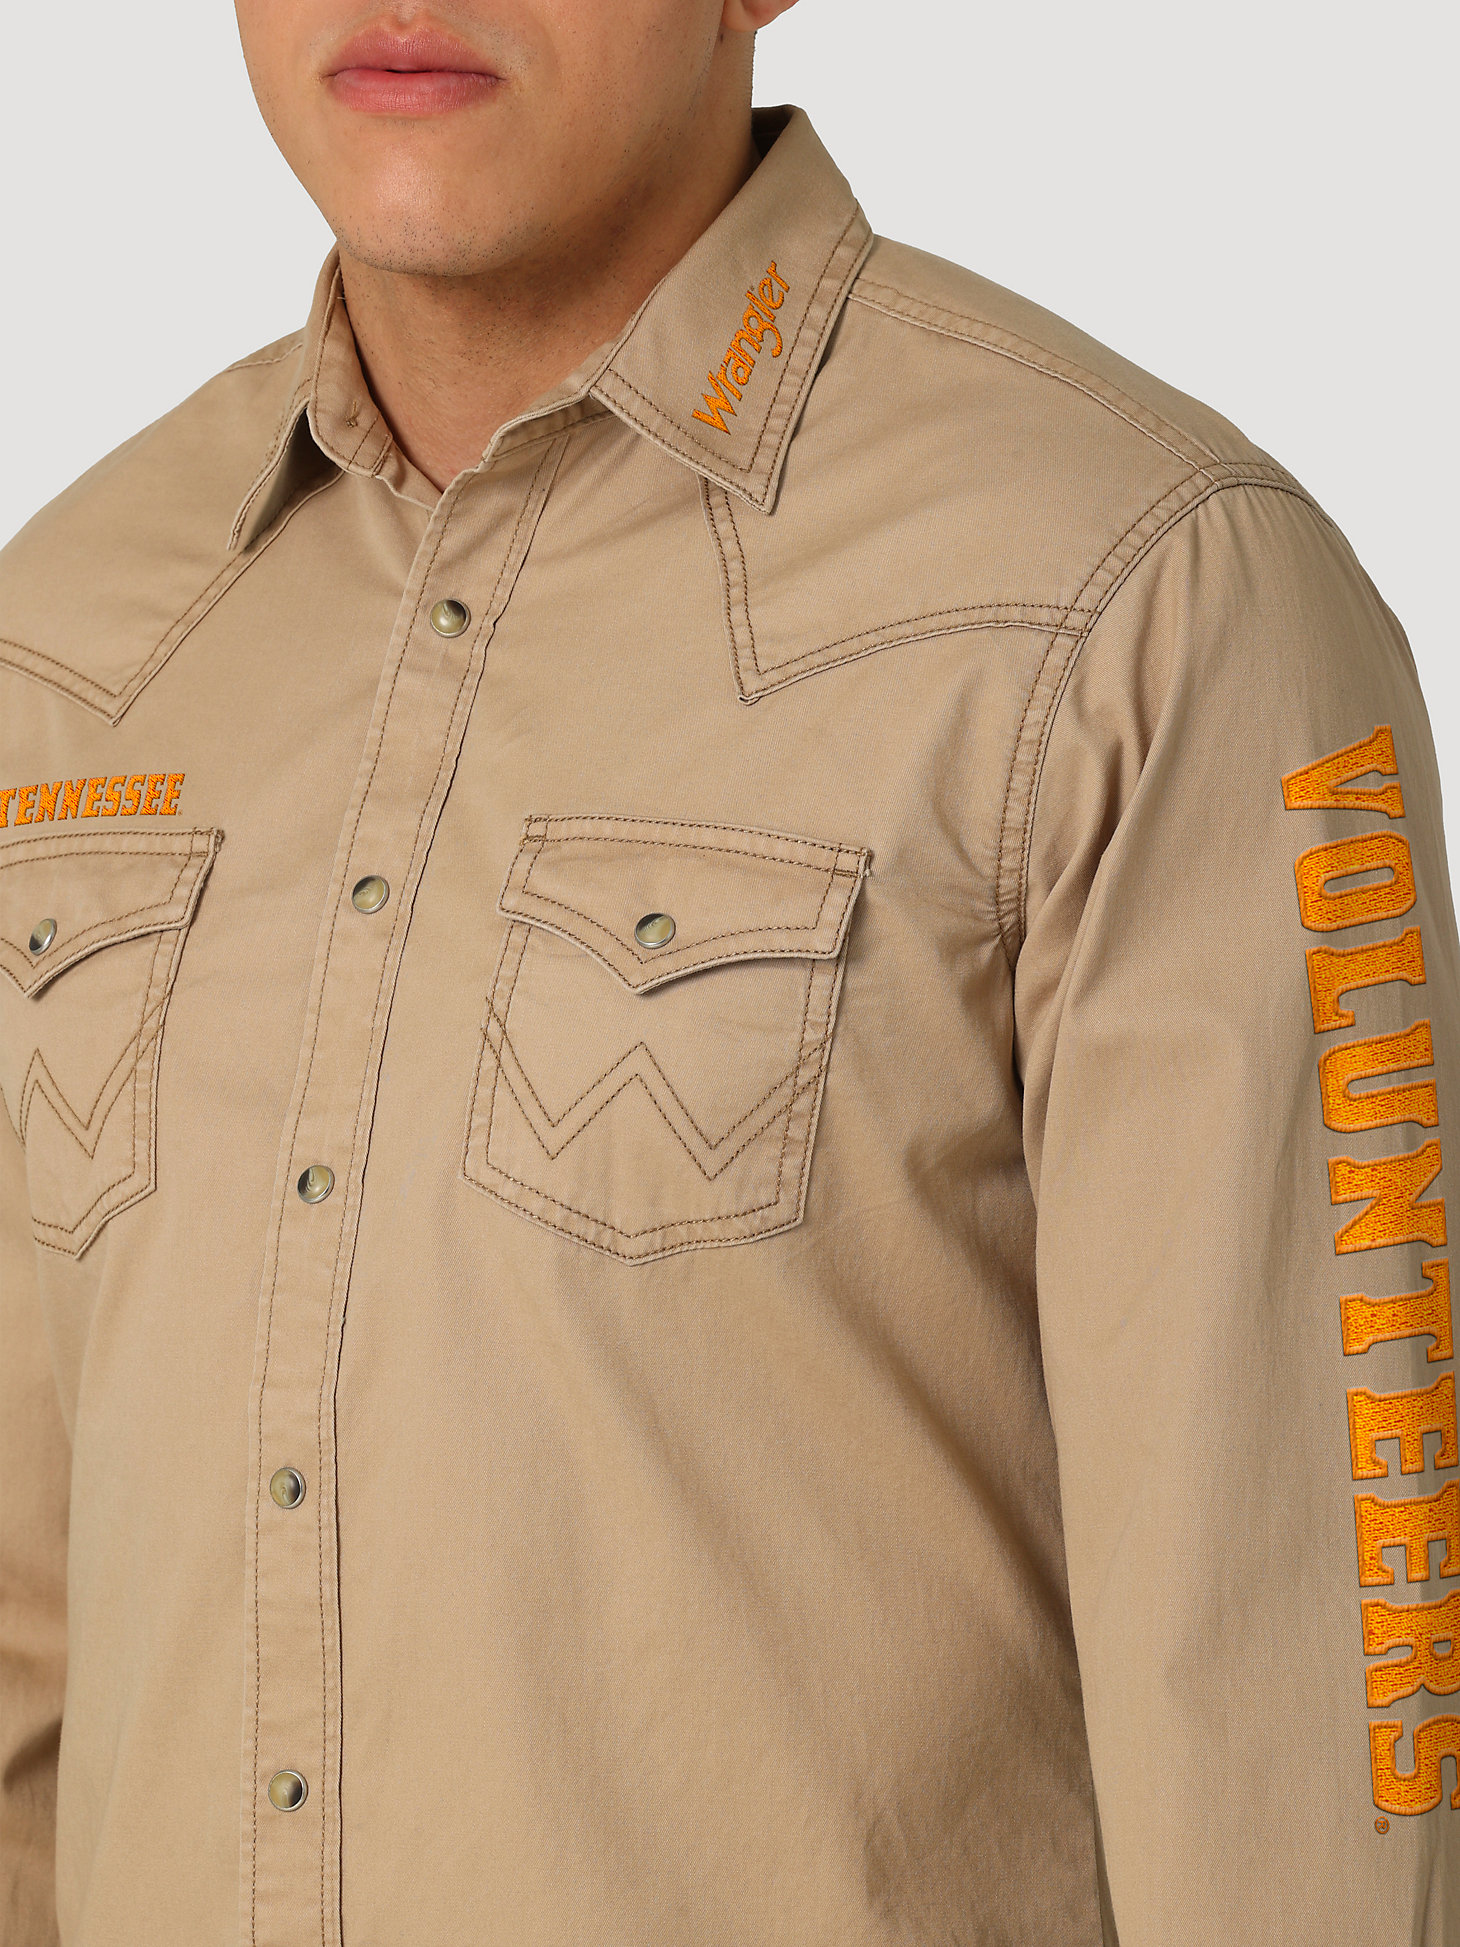 Wrangler Collegiate Embroidered Twill Western Snap Shirt in University of Tennessee alternative view 3